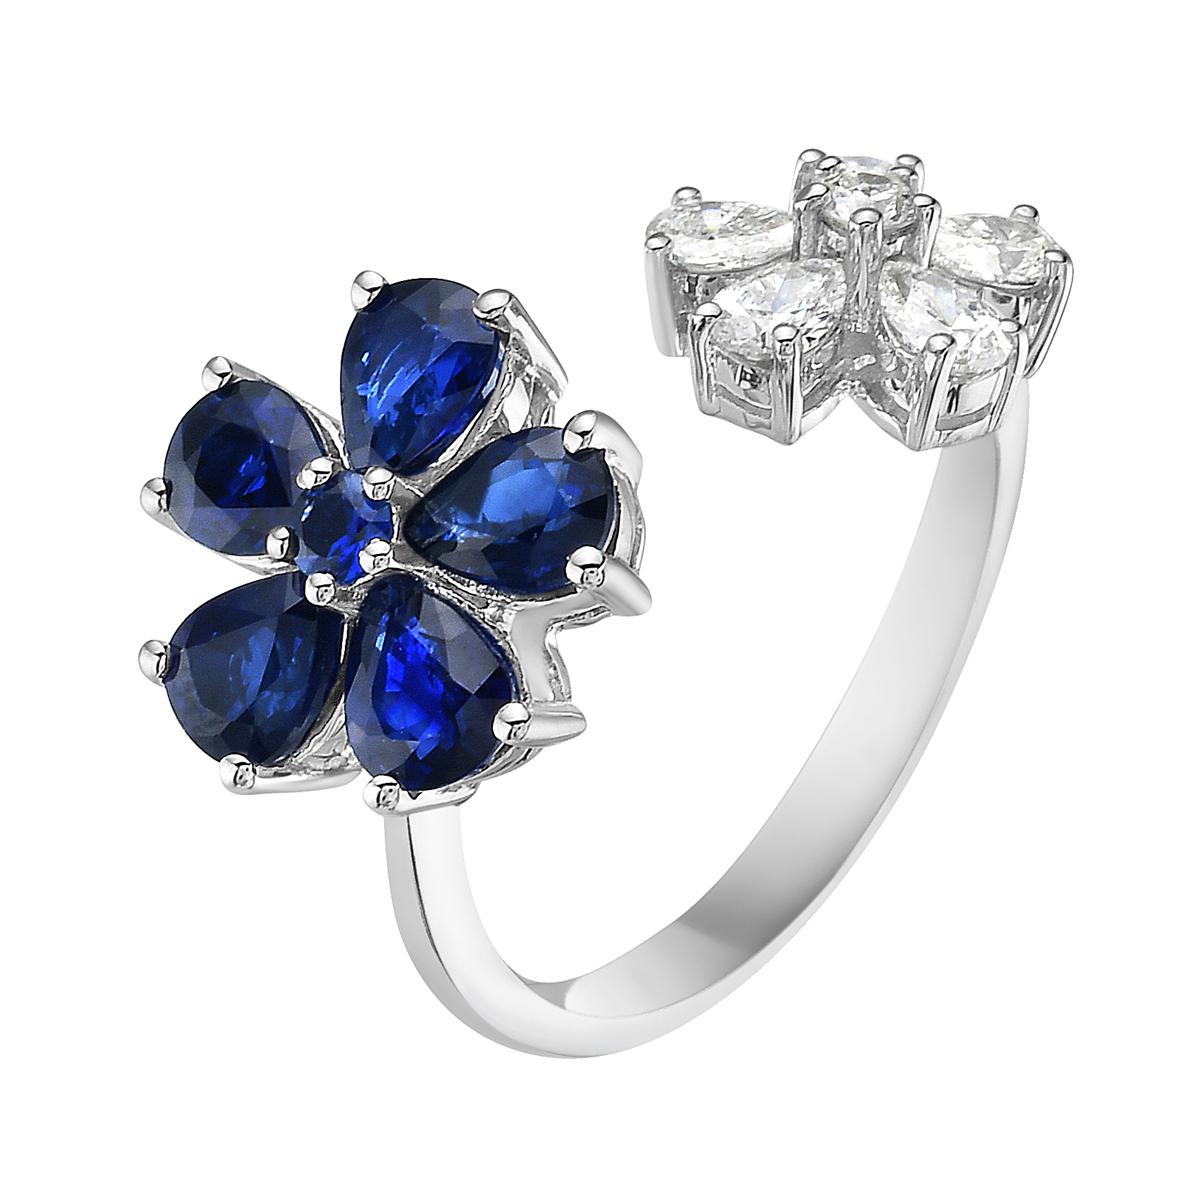 With this exquisite diamond and sapphire ring, style and glamour are in the spotlight. This 18-karat diamond and sapphire ring is made from 4.2 grams of gold. This ring is adorned with VS2, G color diamonds, with a set of 5 pear-shaped sapphires and